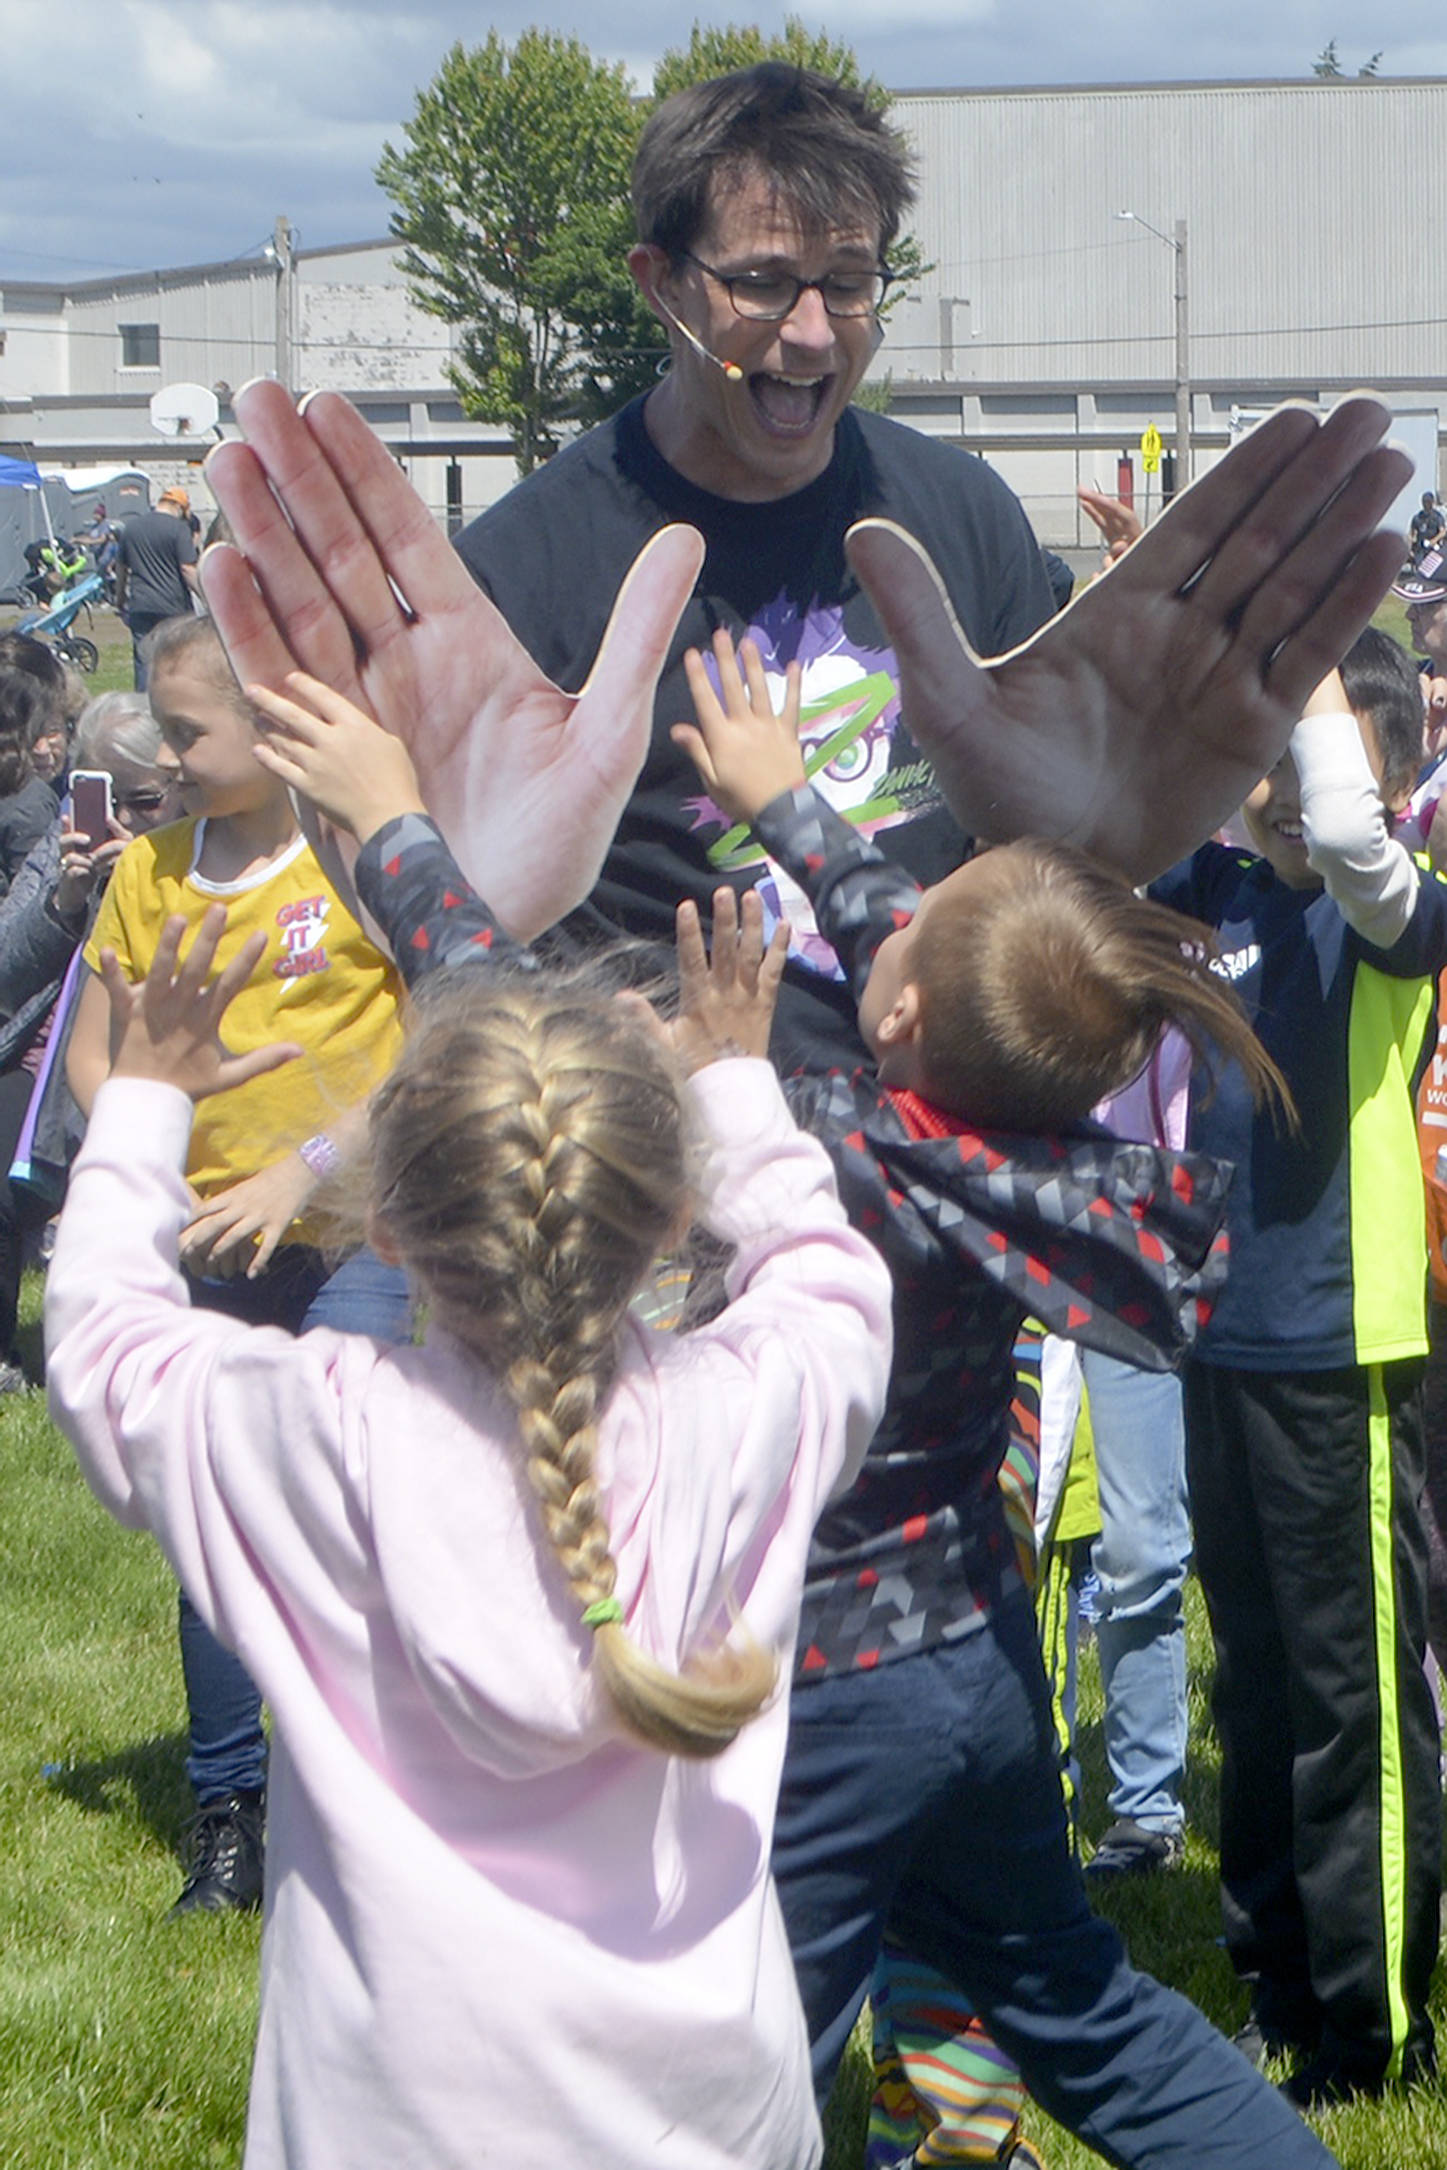 ‘The Zaniac’ gives Marysville Kids Day participants a big hand - actually 2